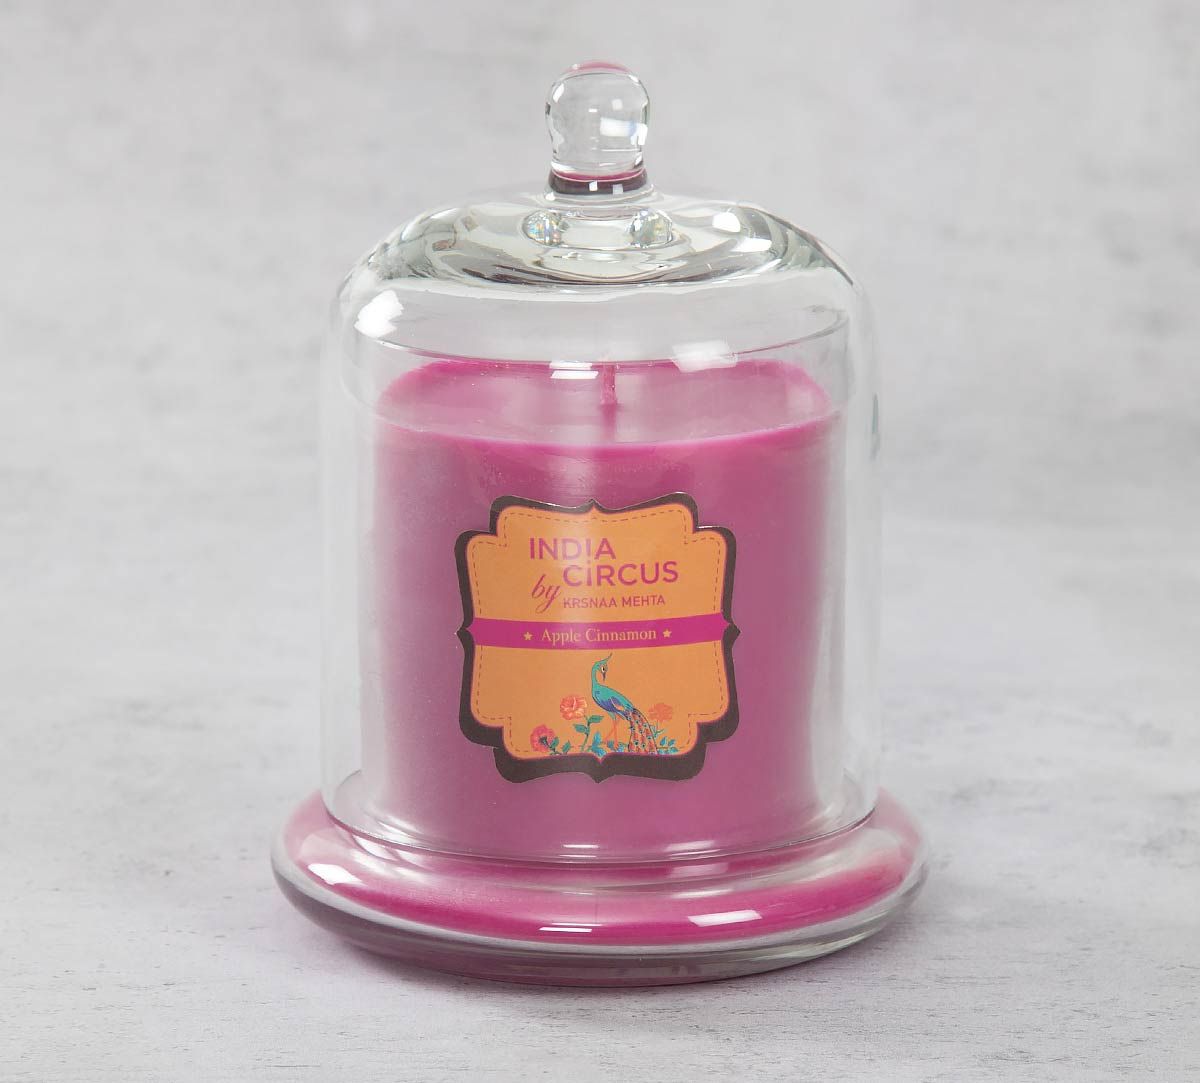 India Circus Apple Cinnamon Glass Jar Scented Candle